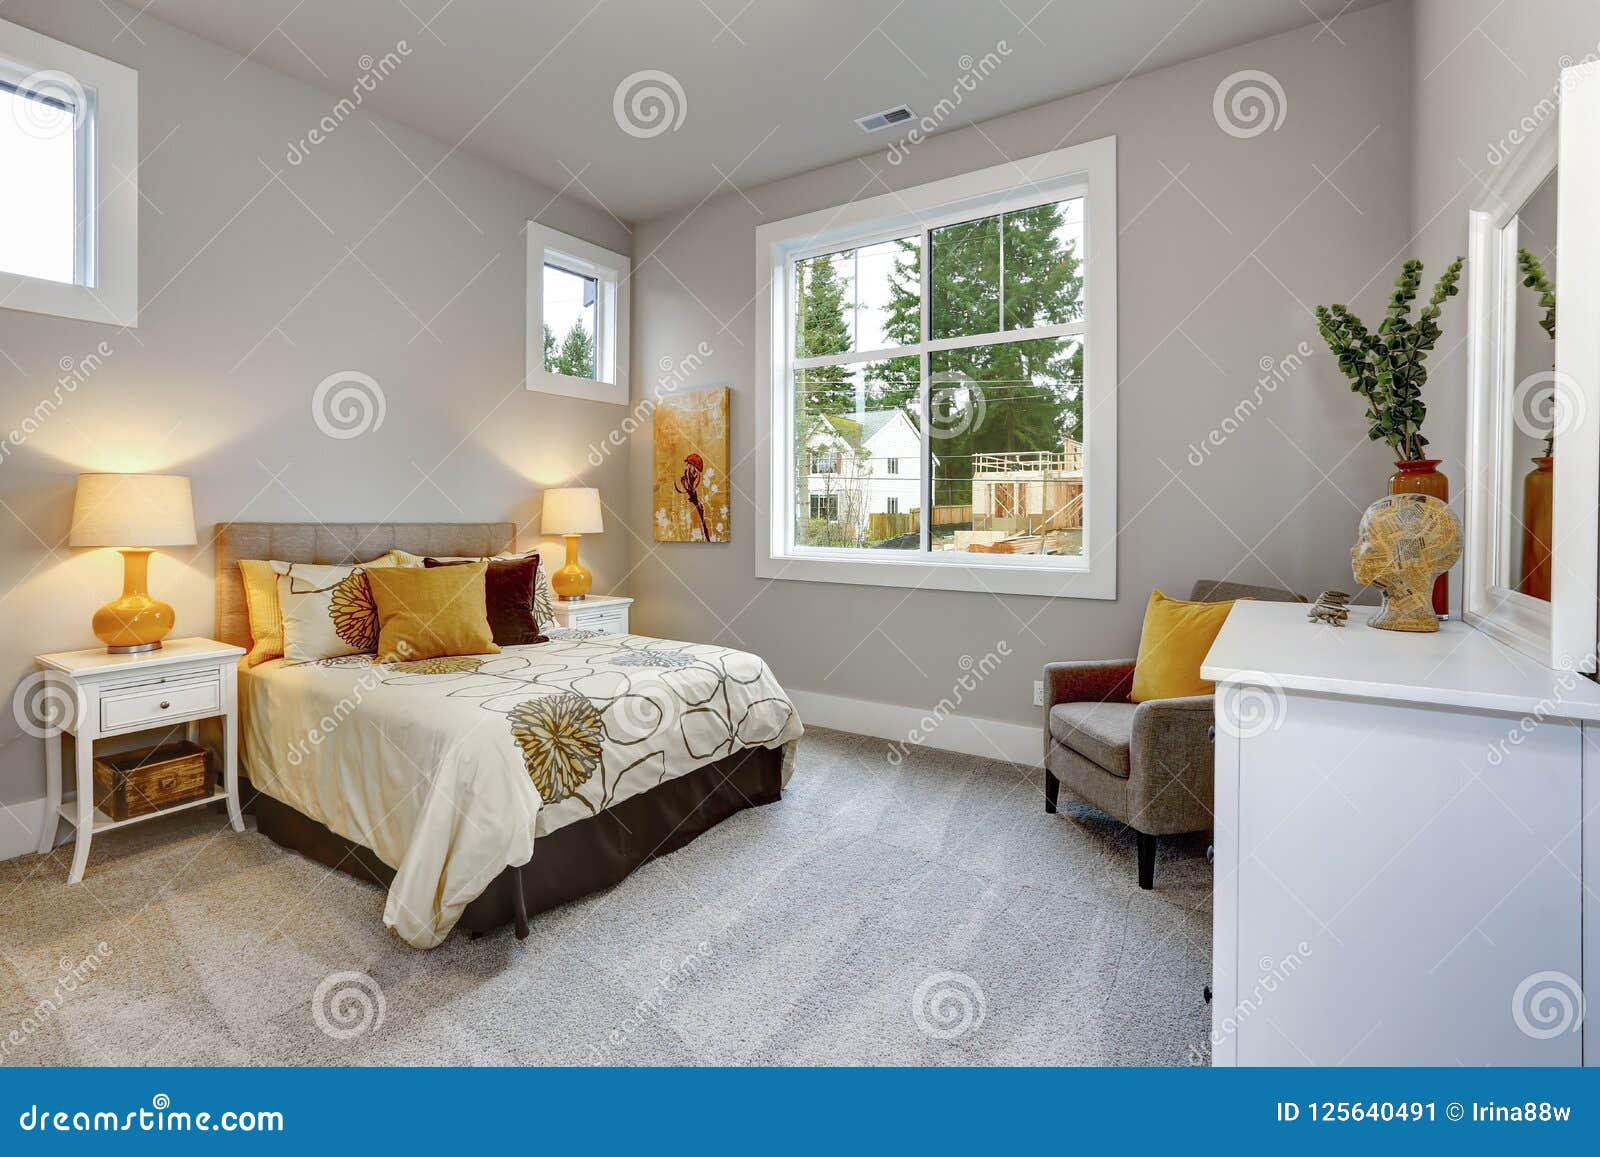 Guest Modern Bedroom Interior With Grey Walls And Orange